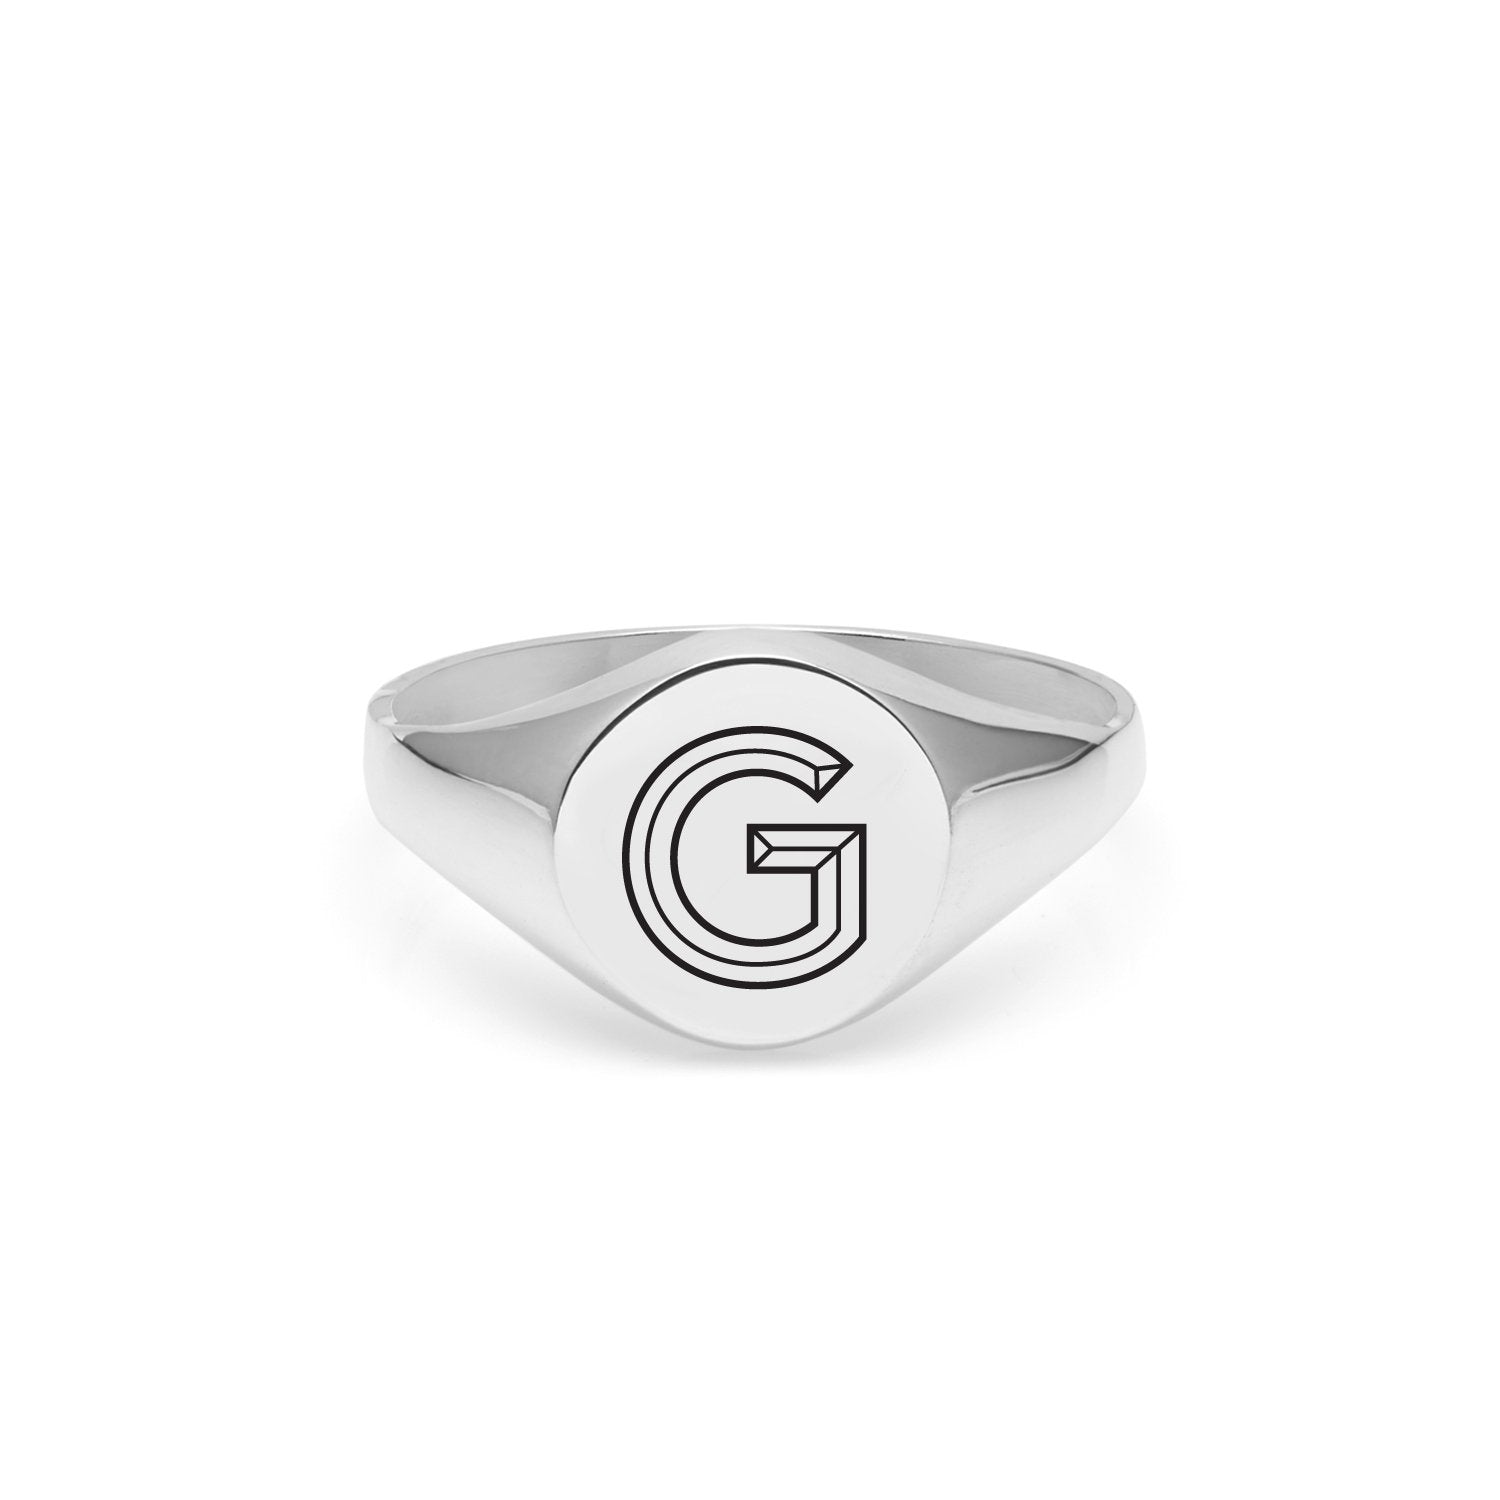 Facett Initial G Round Signet Ring - Silver - Myia Bonner Jewellery